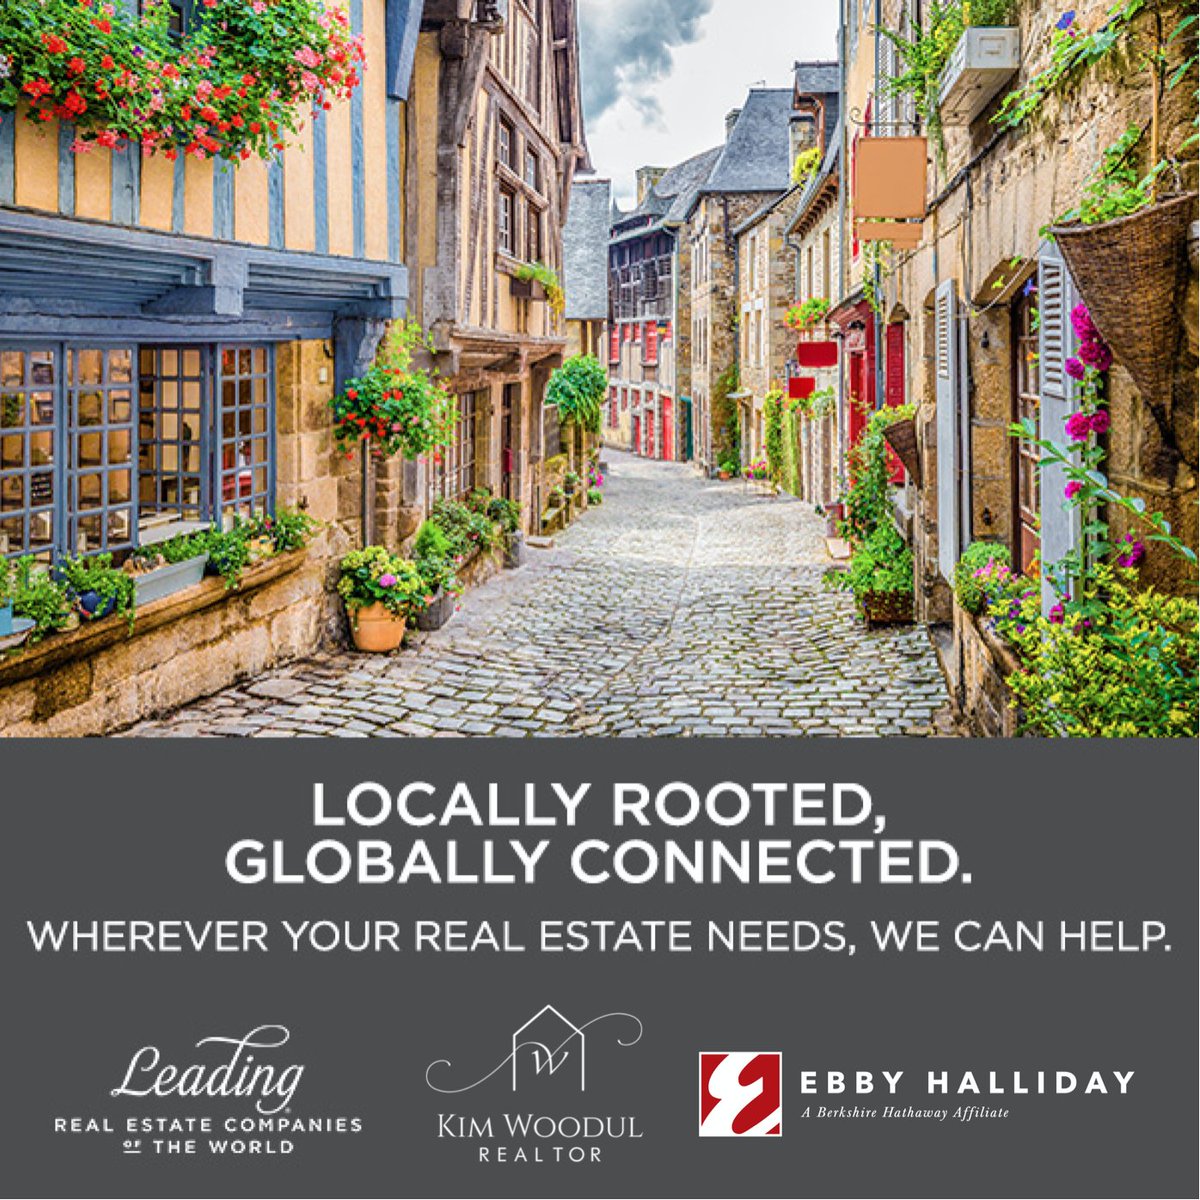 Friends or Family moving in another area, but you want them to have the same amazing #Ebby Quality of Service?  Let me make a connection for you!  

Call me for more info. 
☎️ 214-392-7303 
📍kimwoodulrealtor.com

#ThinkLocal #ThinkGlobal #Relo #RelocationExpert #Relocating